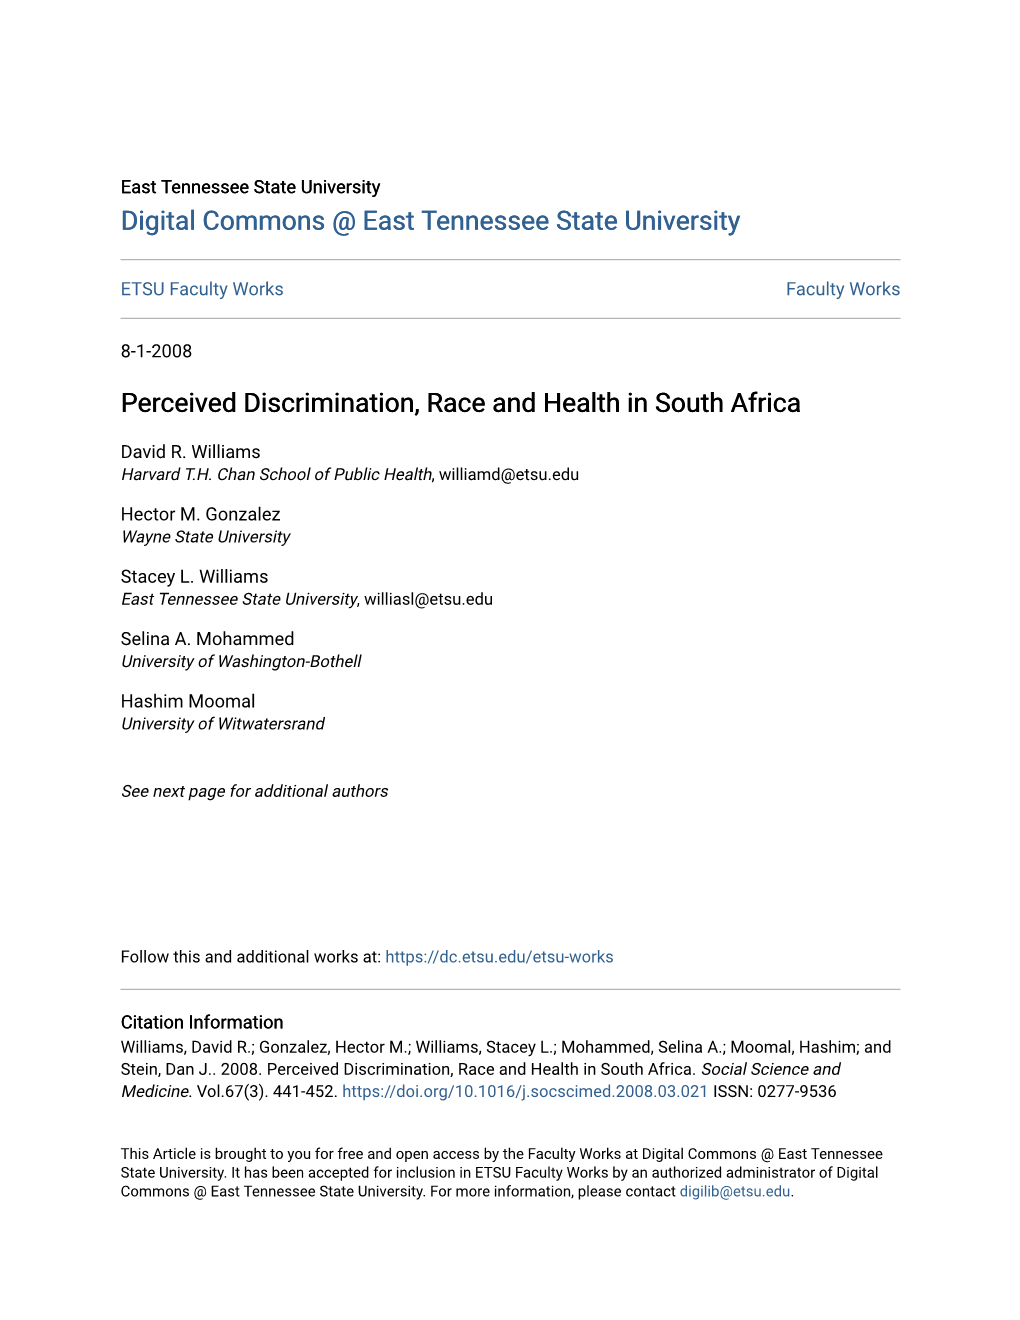 Perceived Discrimination, Race and Health in South Africa